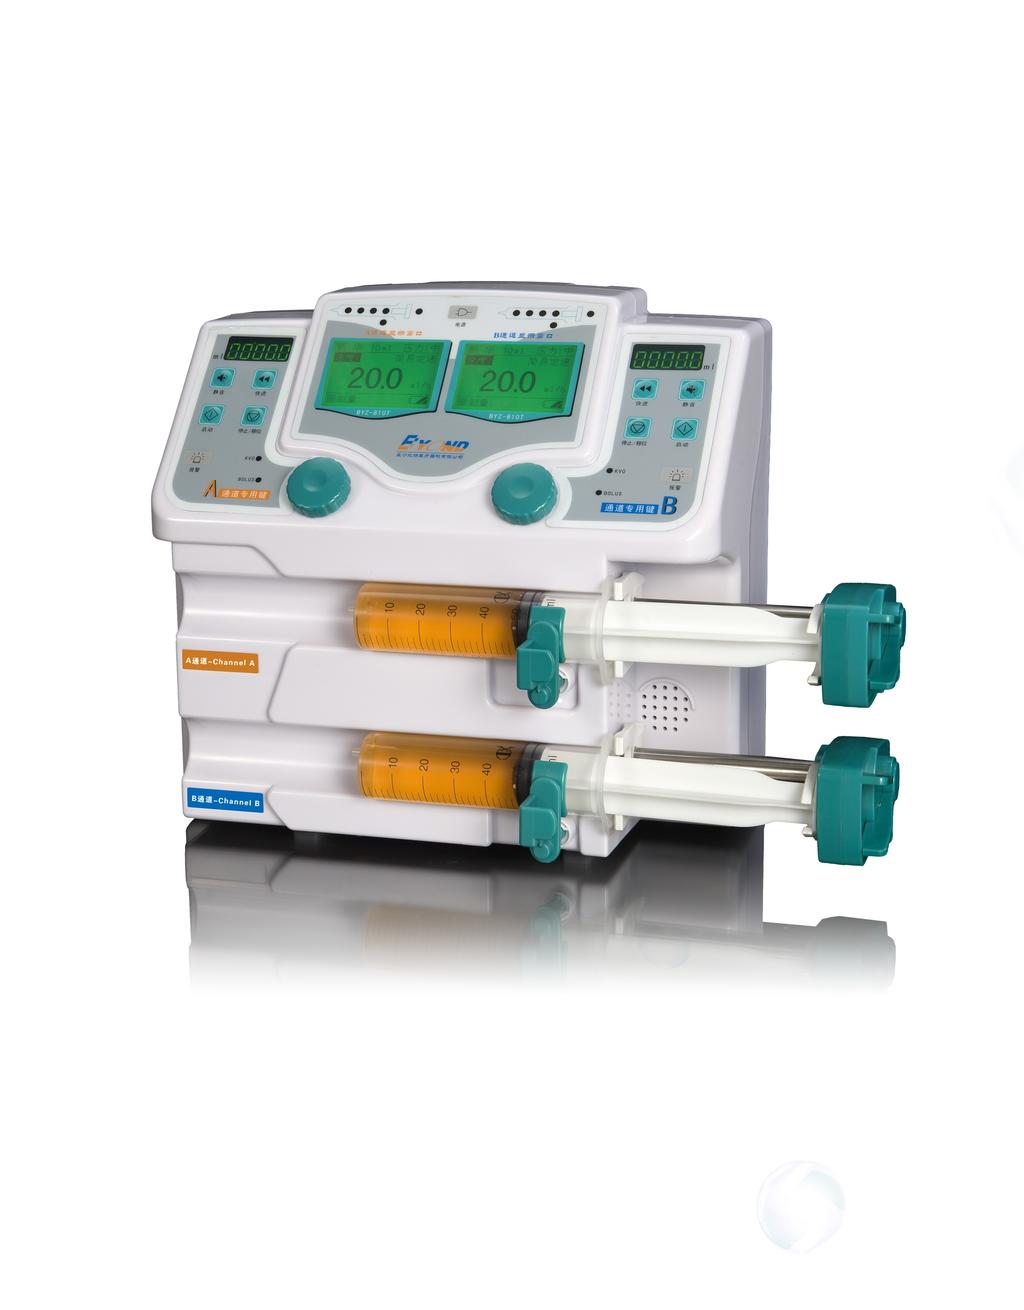 Volume, which can greatly reduce the workload of hospital The syringe pump has three working modes: Simple rate mode, Time Volume mode, Dosage and Weight mode The syringe pump can automatically